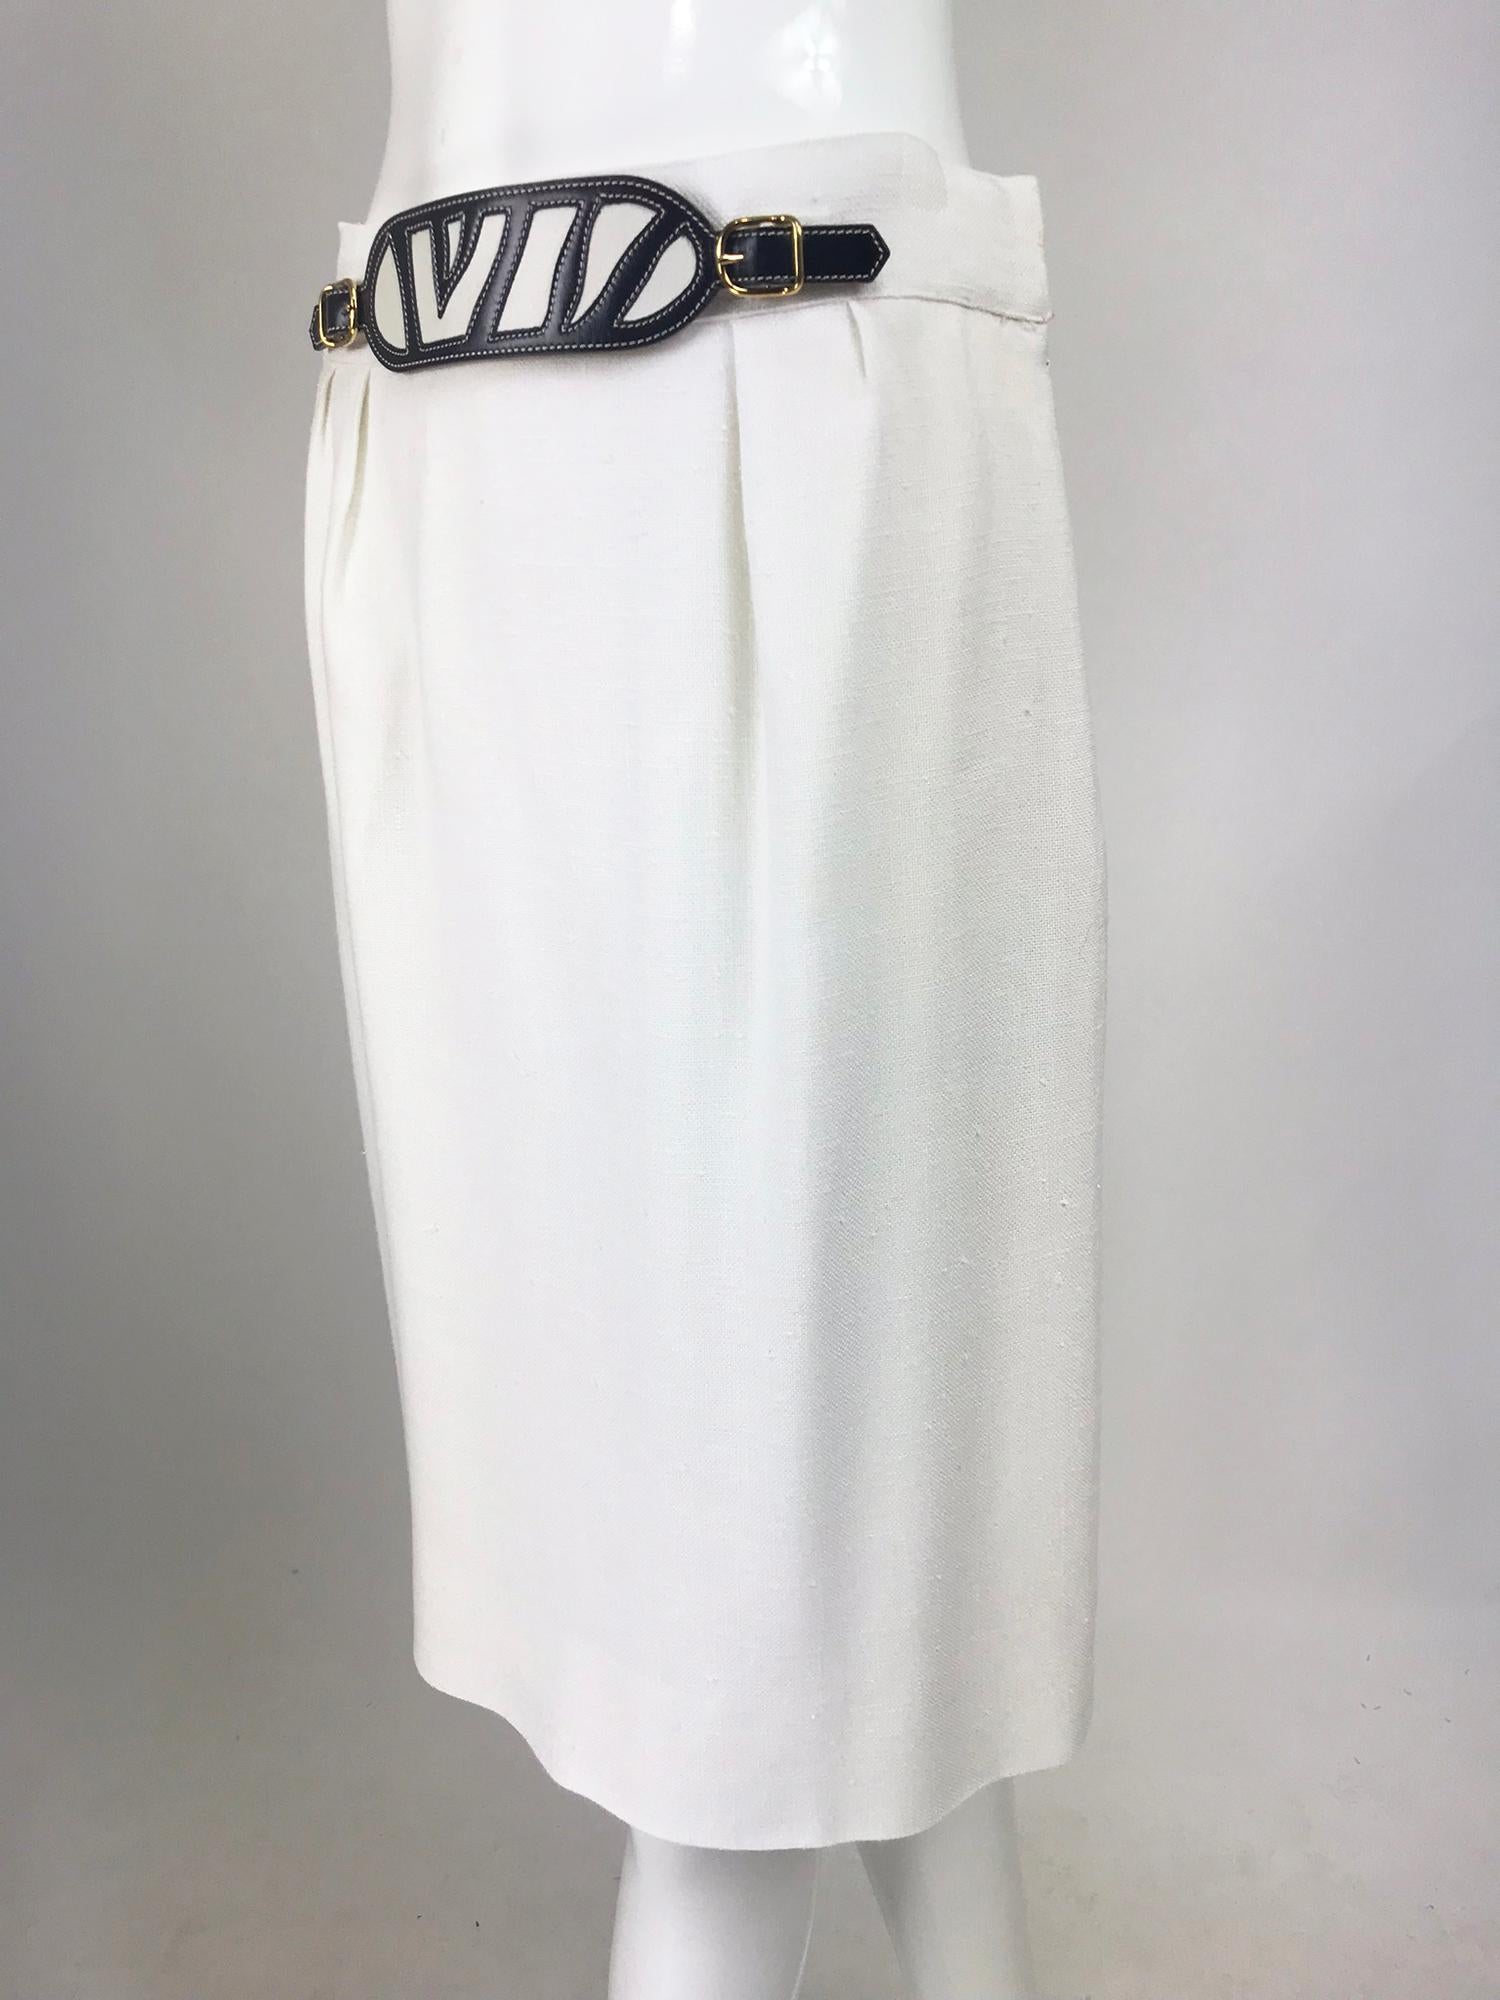 Hermes White linen skirt with navy & white leather belt front from the 1990s. This beautiful skirt has a banded waist the front has a decorative intarsia leather belt in navy blue and white with gold hardware, the belt is marked Hermes see photo,